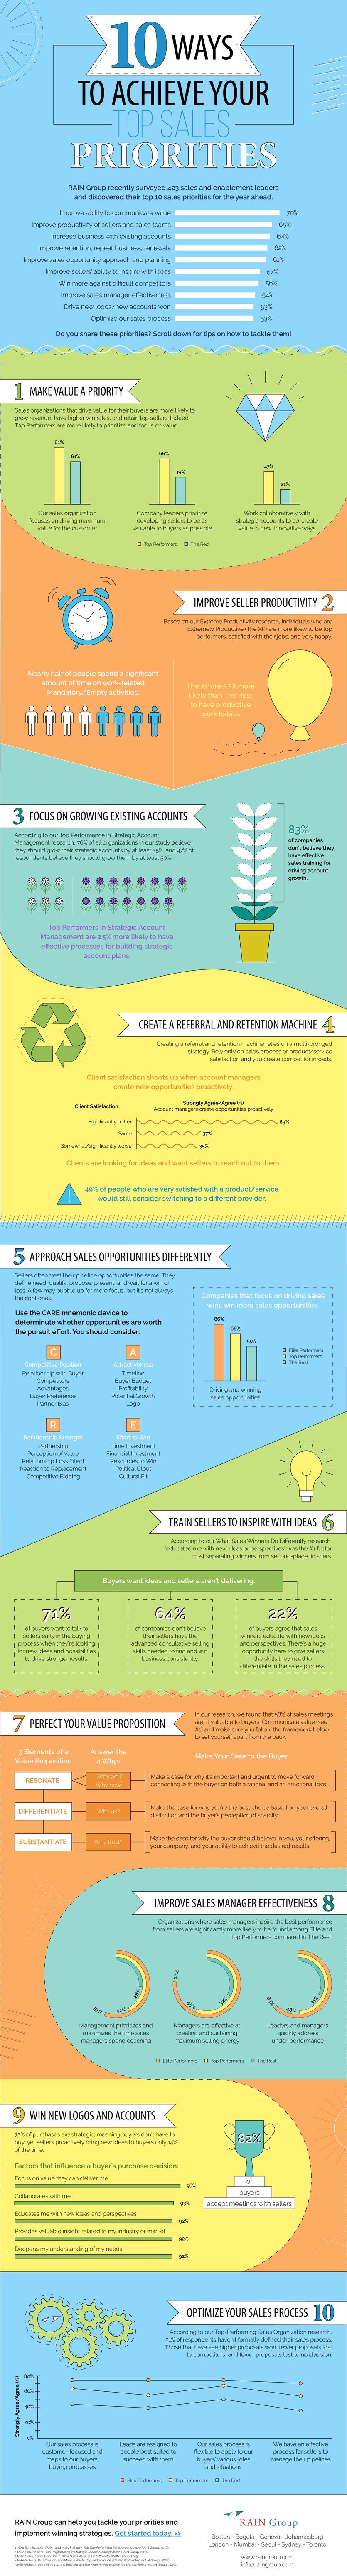 Click here to view enlarge the infographic, 10 Ways to Achieve Your Top Sales Priorities.